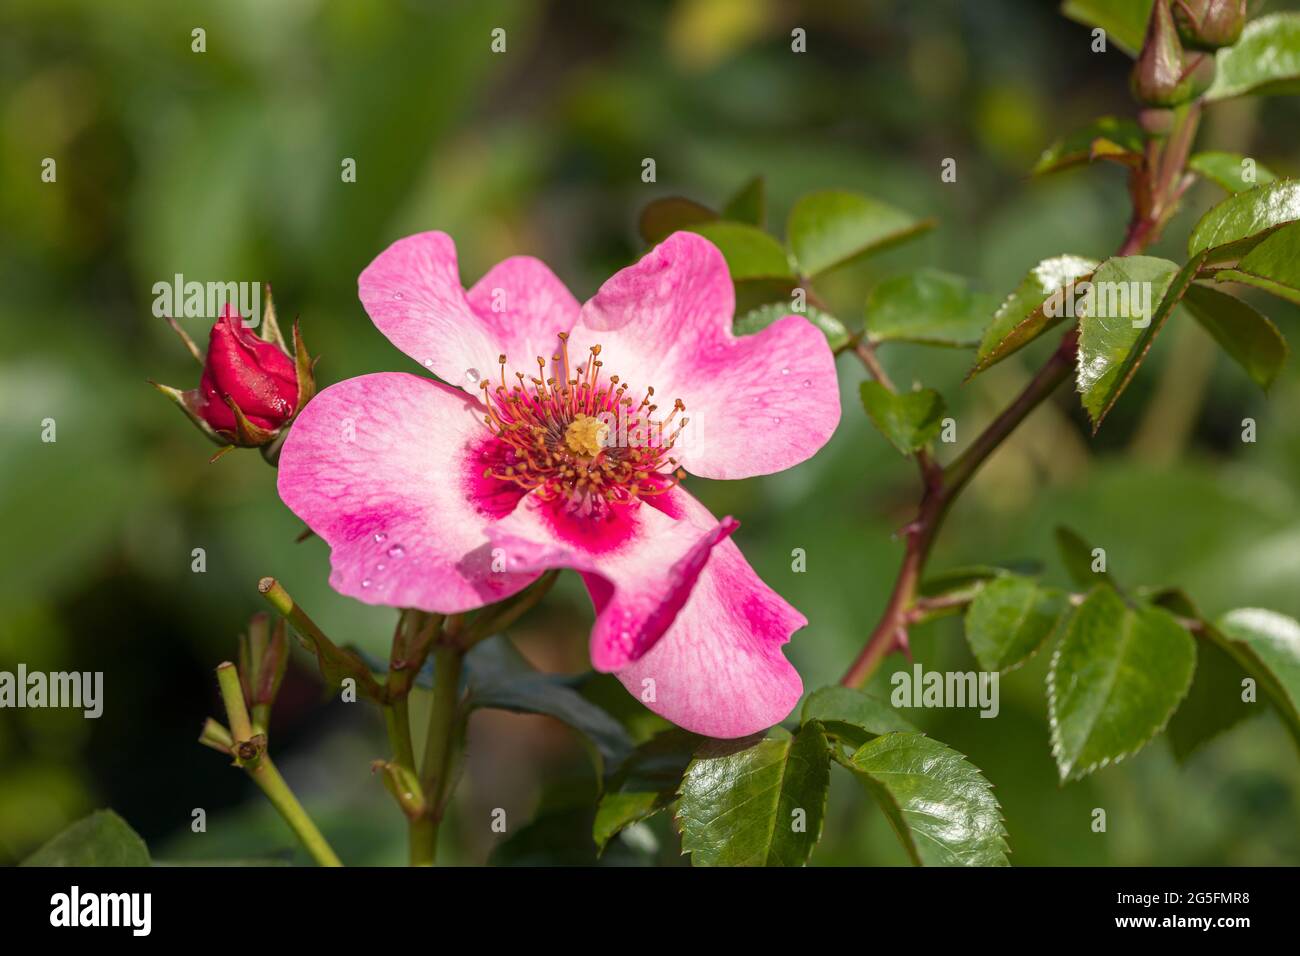 Close up of a pink shrub rose with two tone flowers called Rosa Leah Tulu flowering in an English garden. A beautiful single pink rose bloom. UK Stock Photo